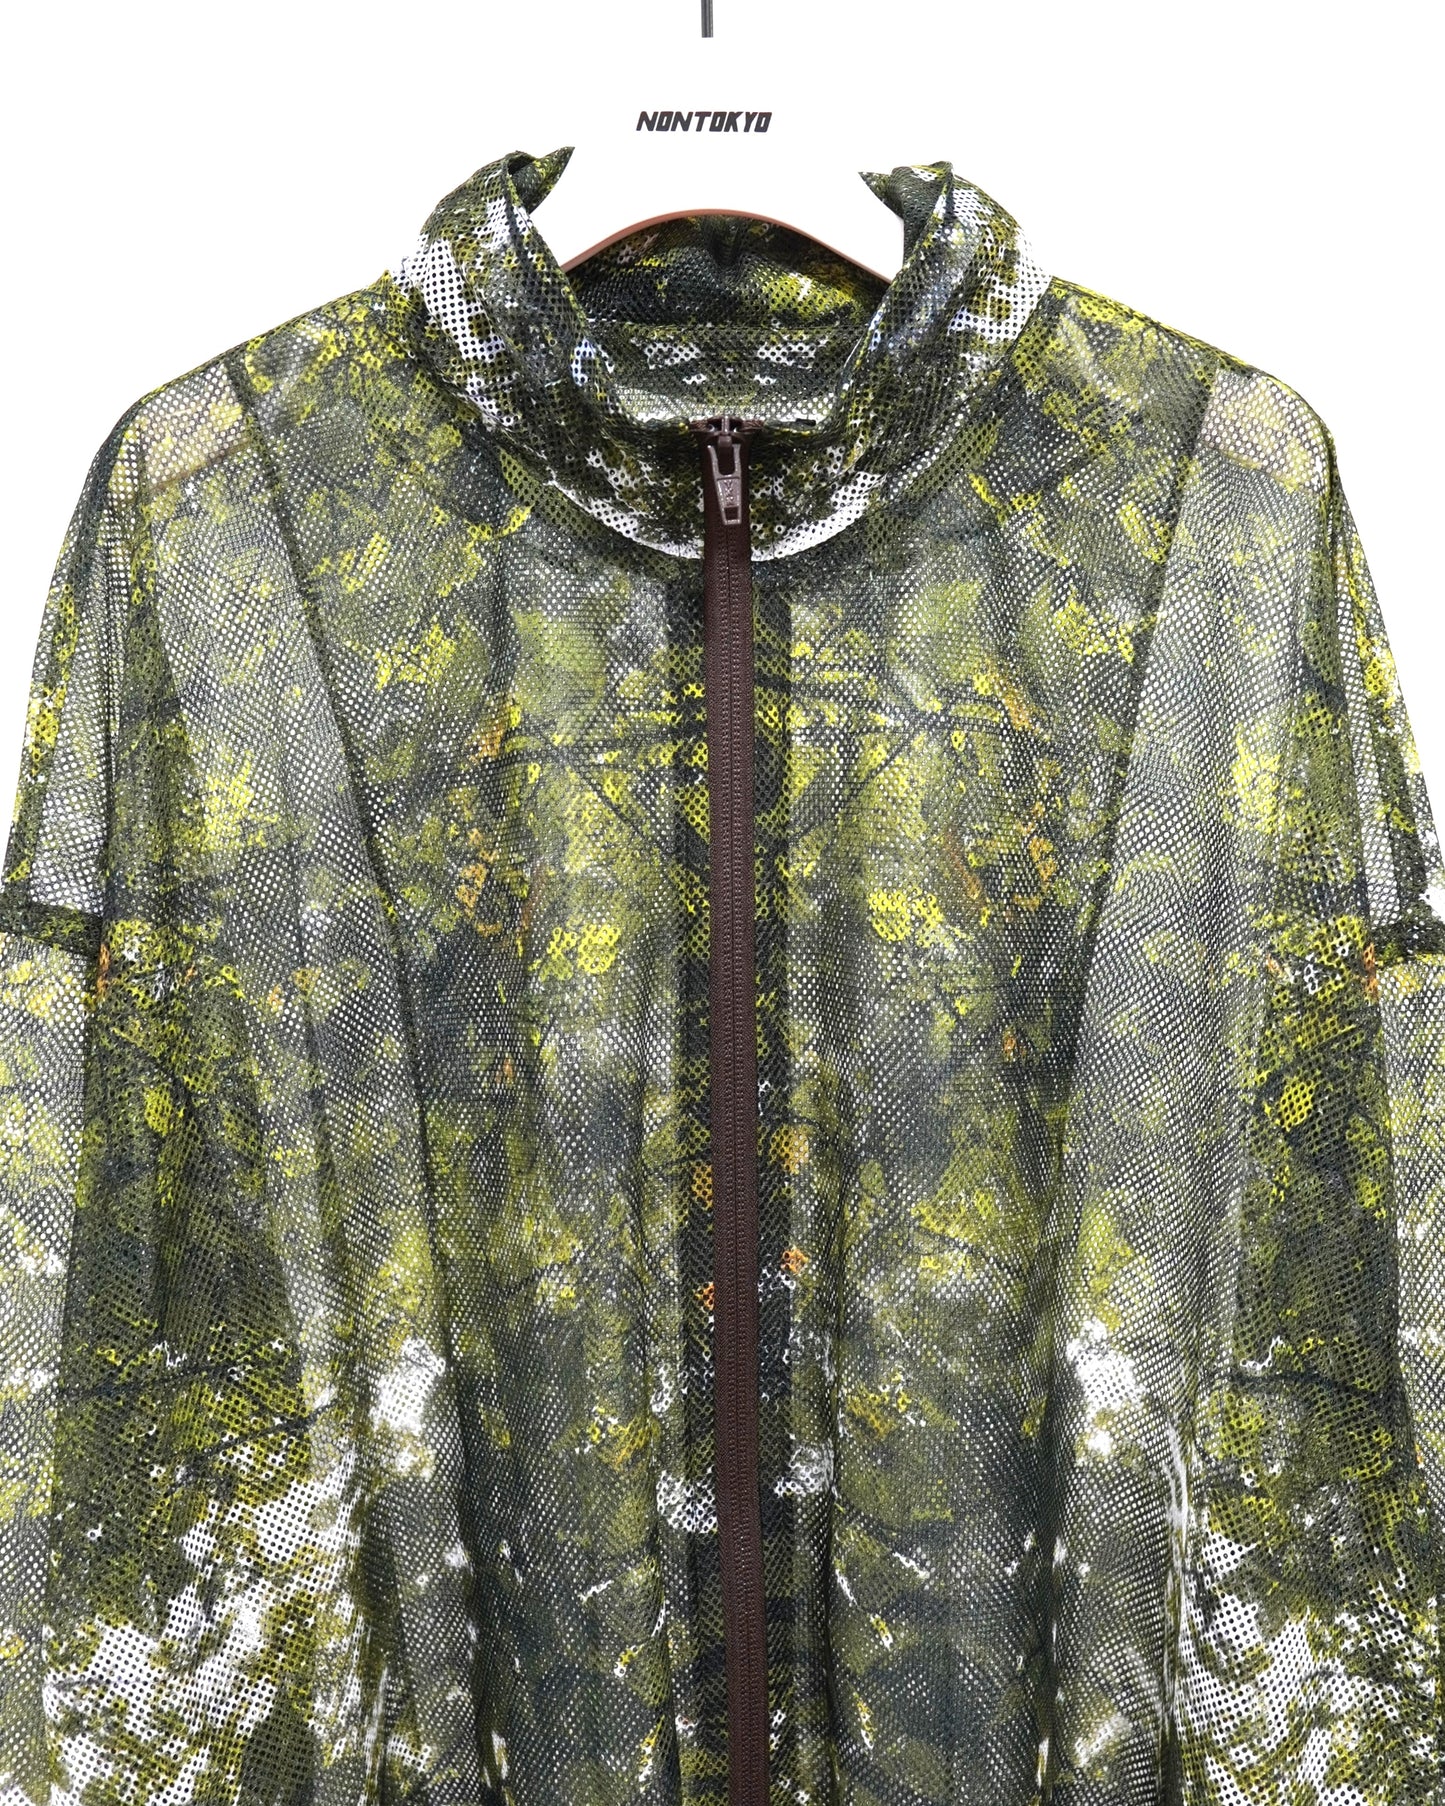 NON TOKYO / PRINT MESH ZIP-UP PARKA (FOREST) / 〈ノントーキョー〉プリントメッシュジップアップパーカー (フォレスト)